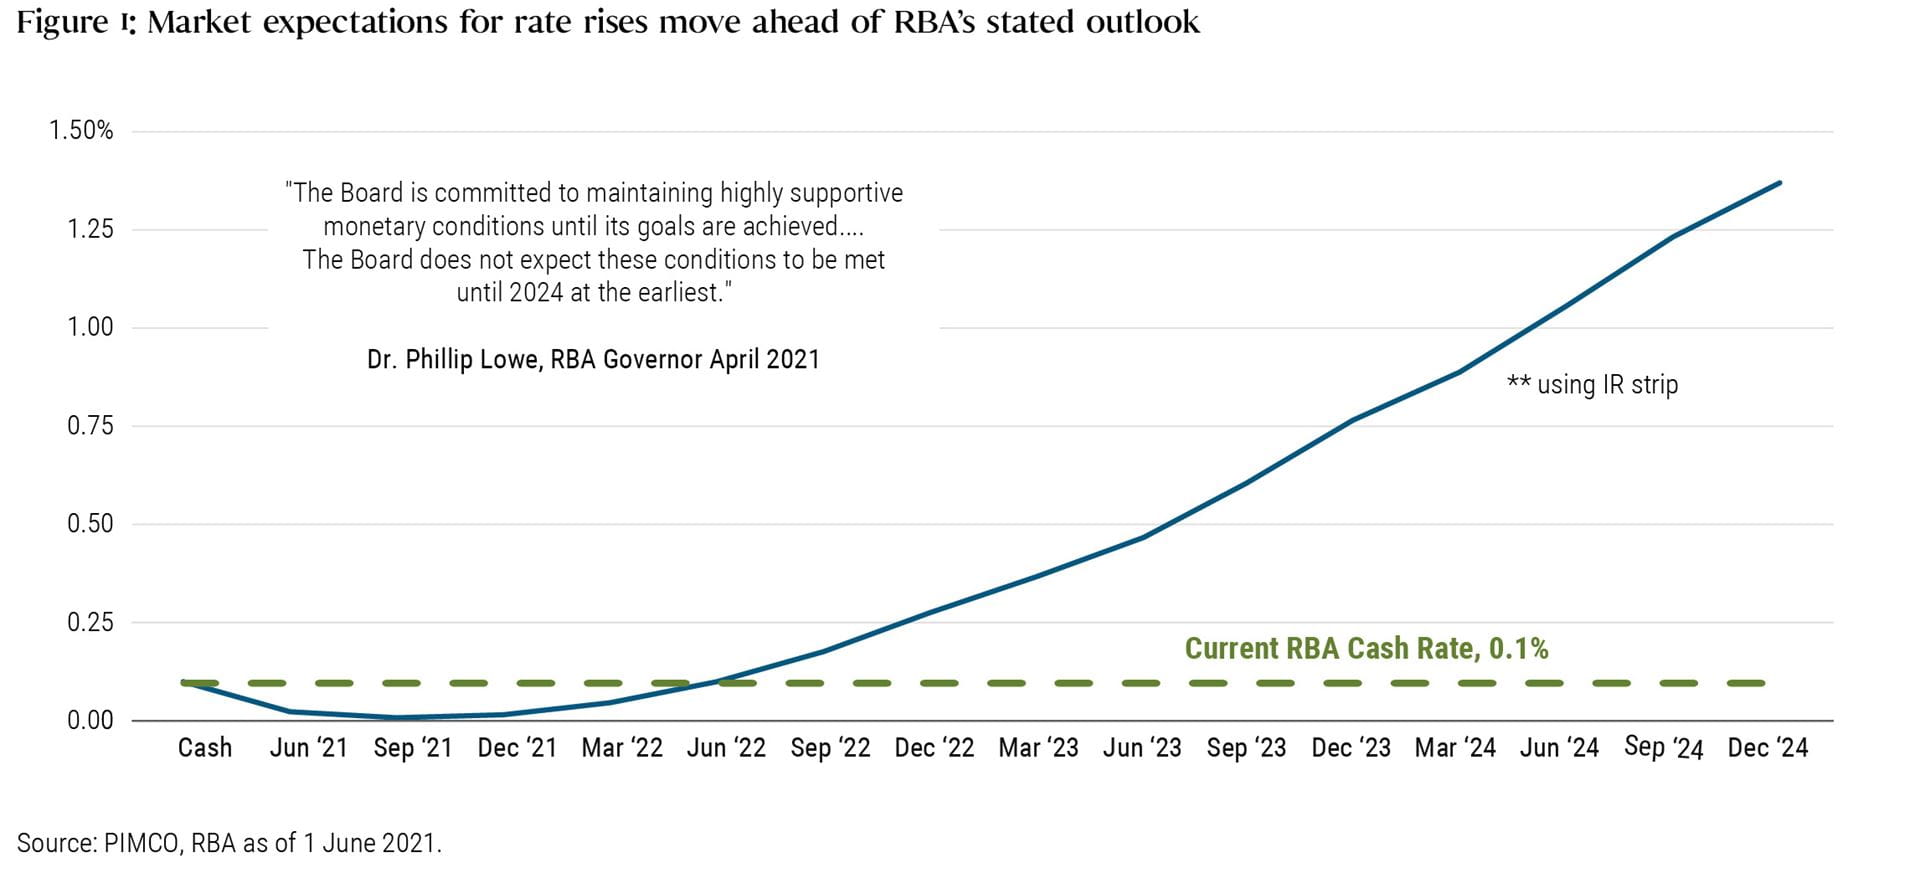 Figure 1: Market expectations for rate rises move ahead of RBA’s stated outlook